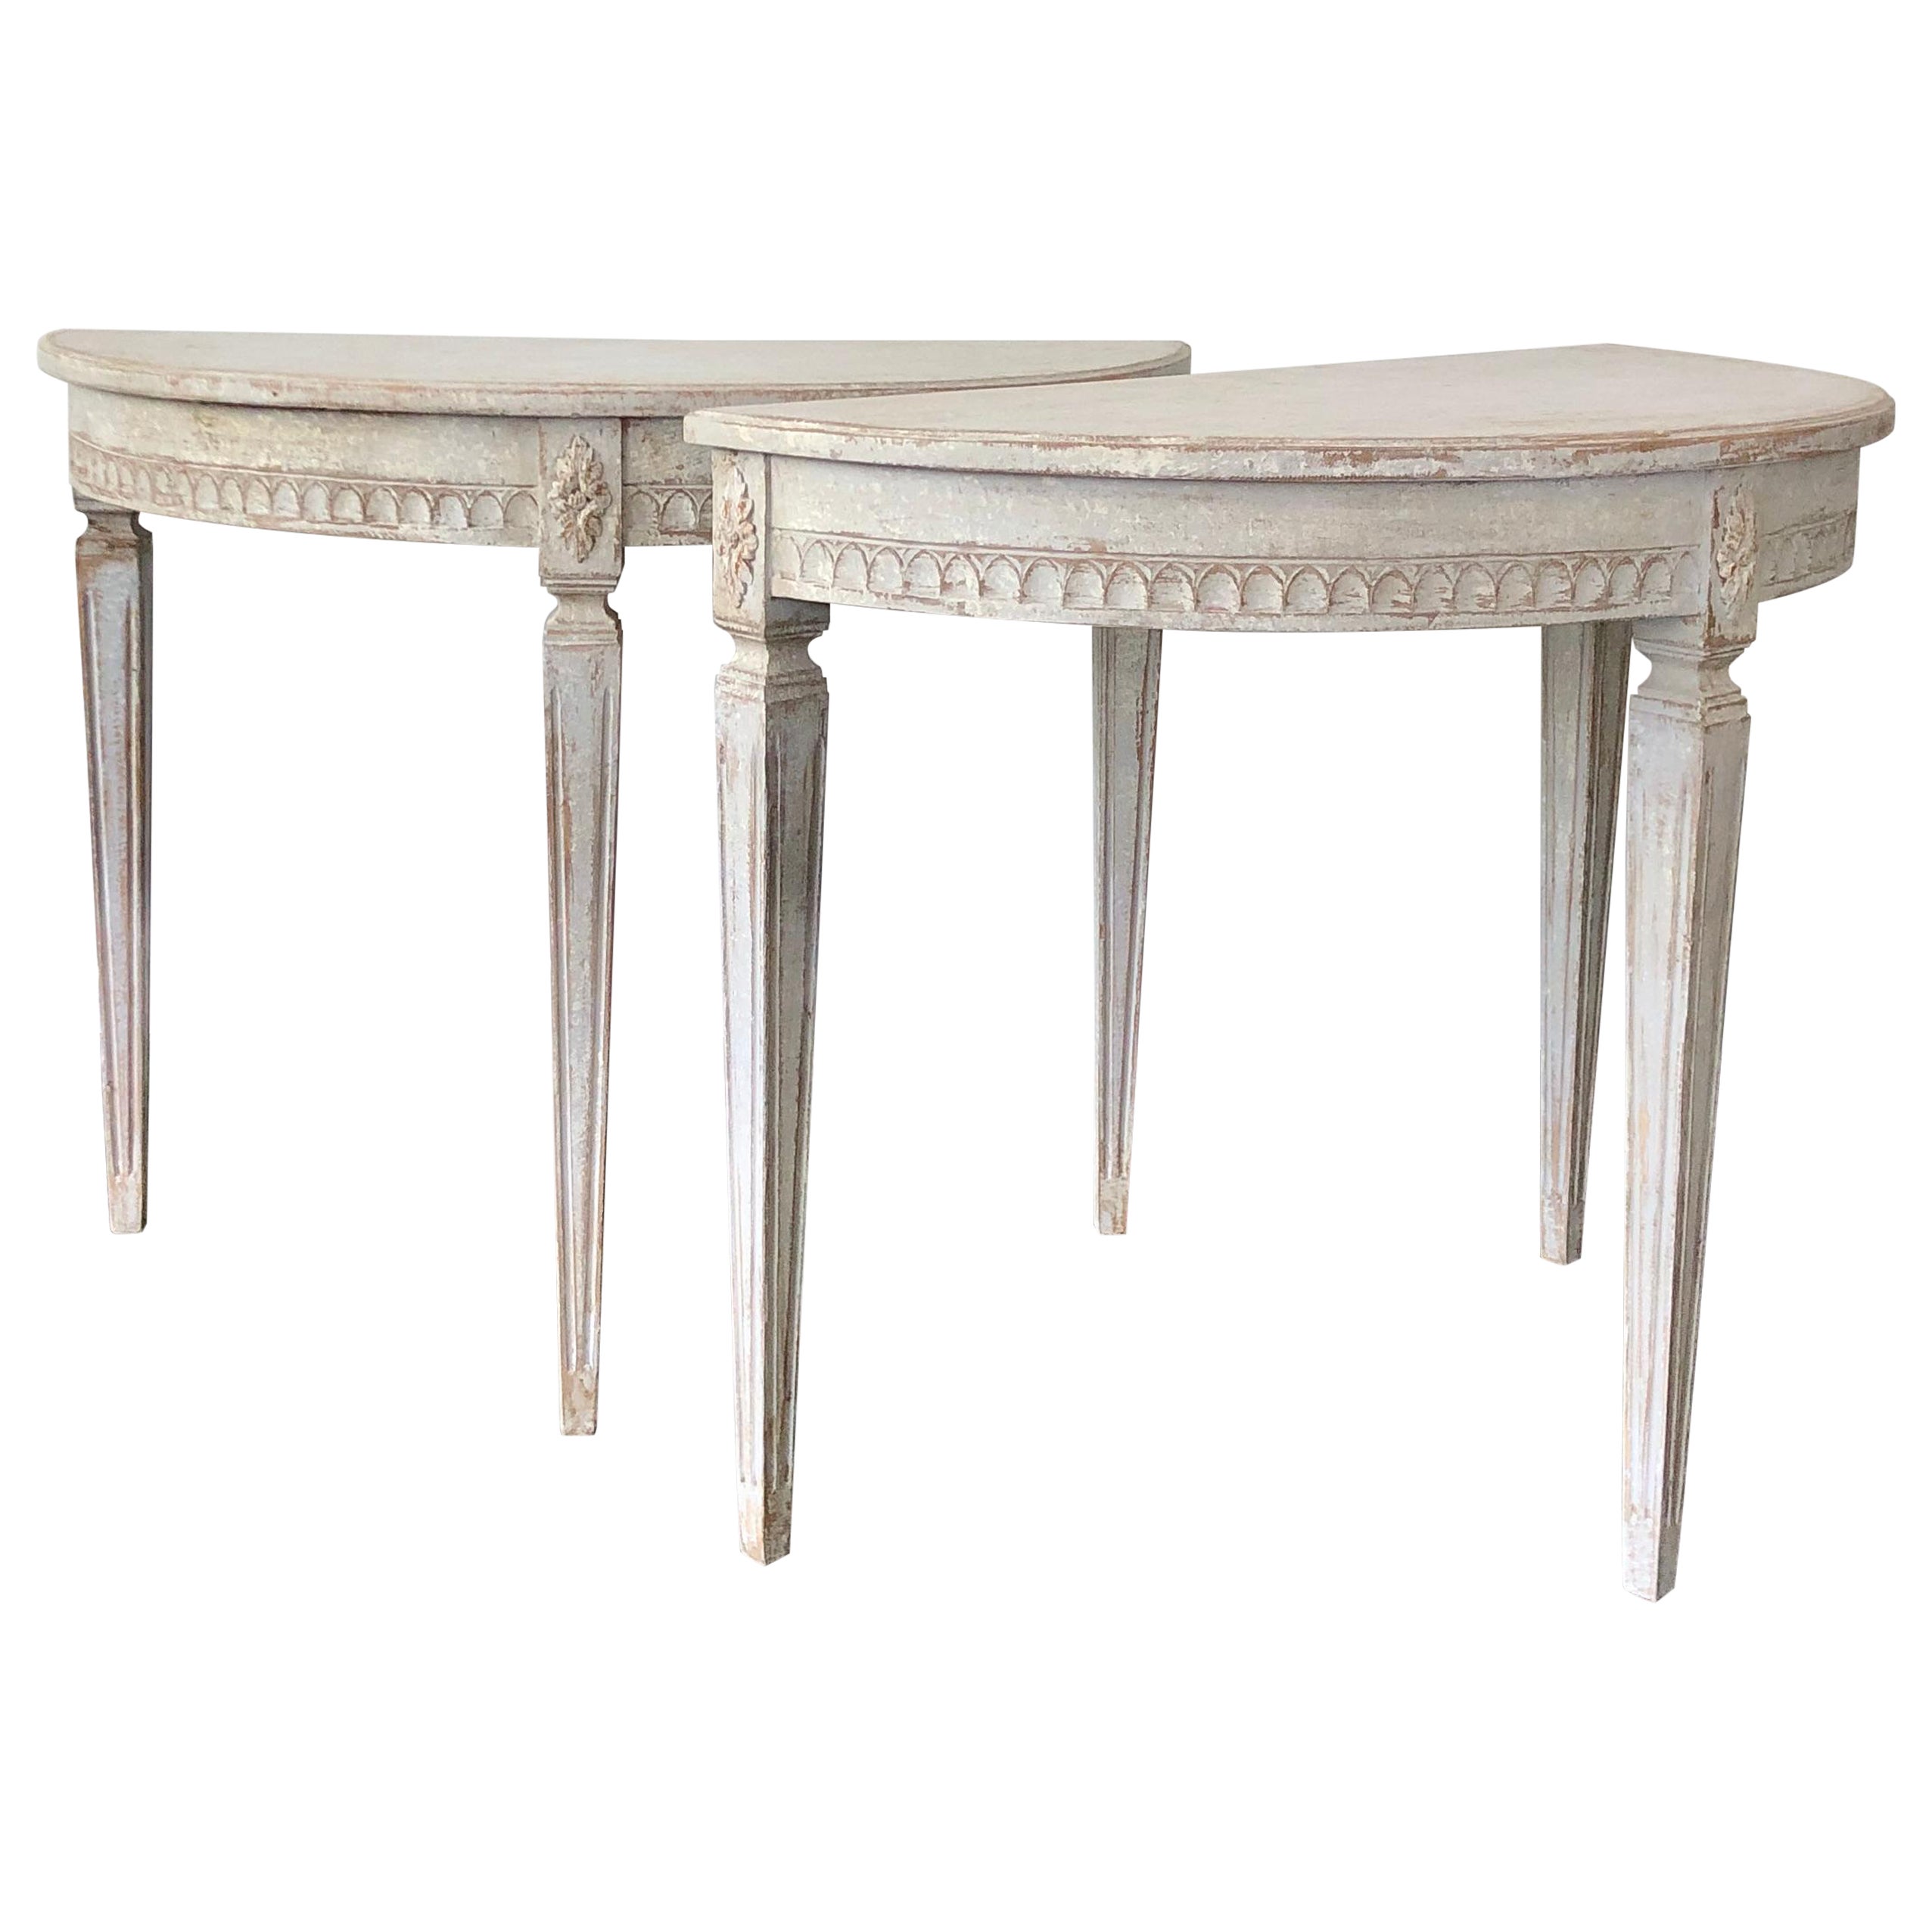 Pair of Period Gustavian Demilune Console Tables